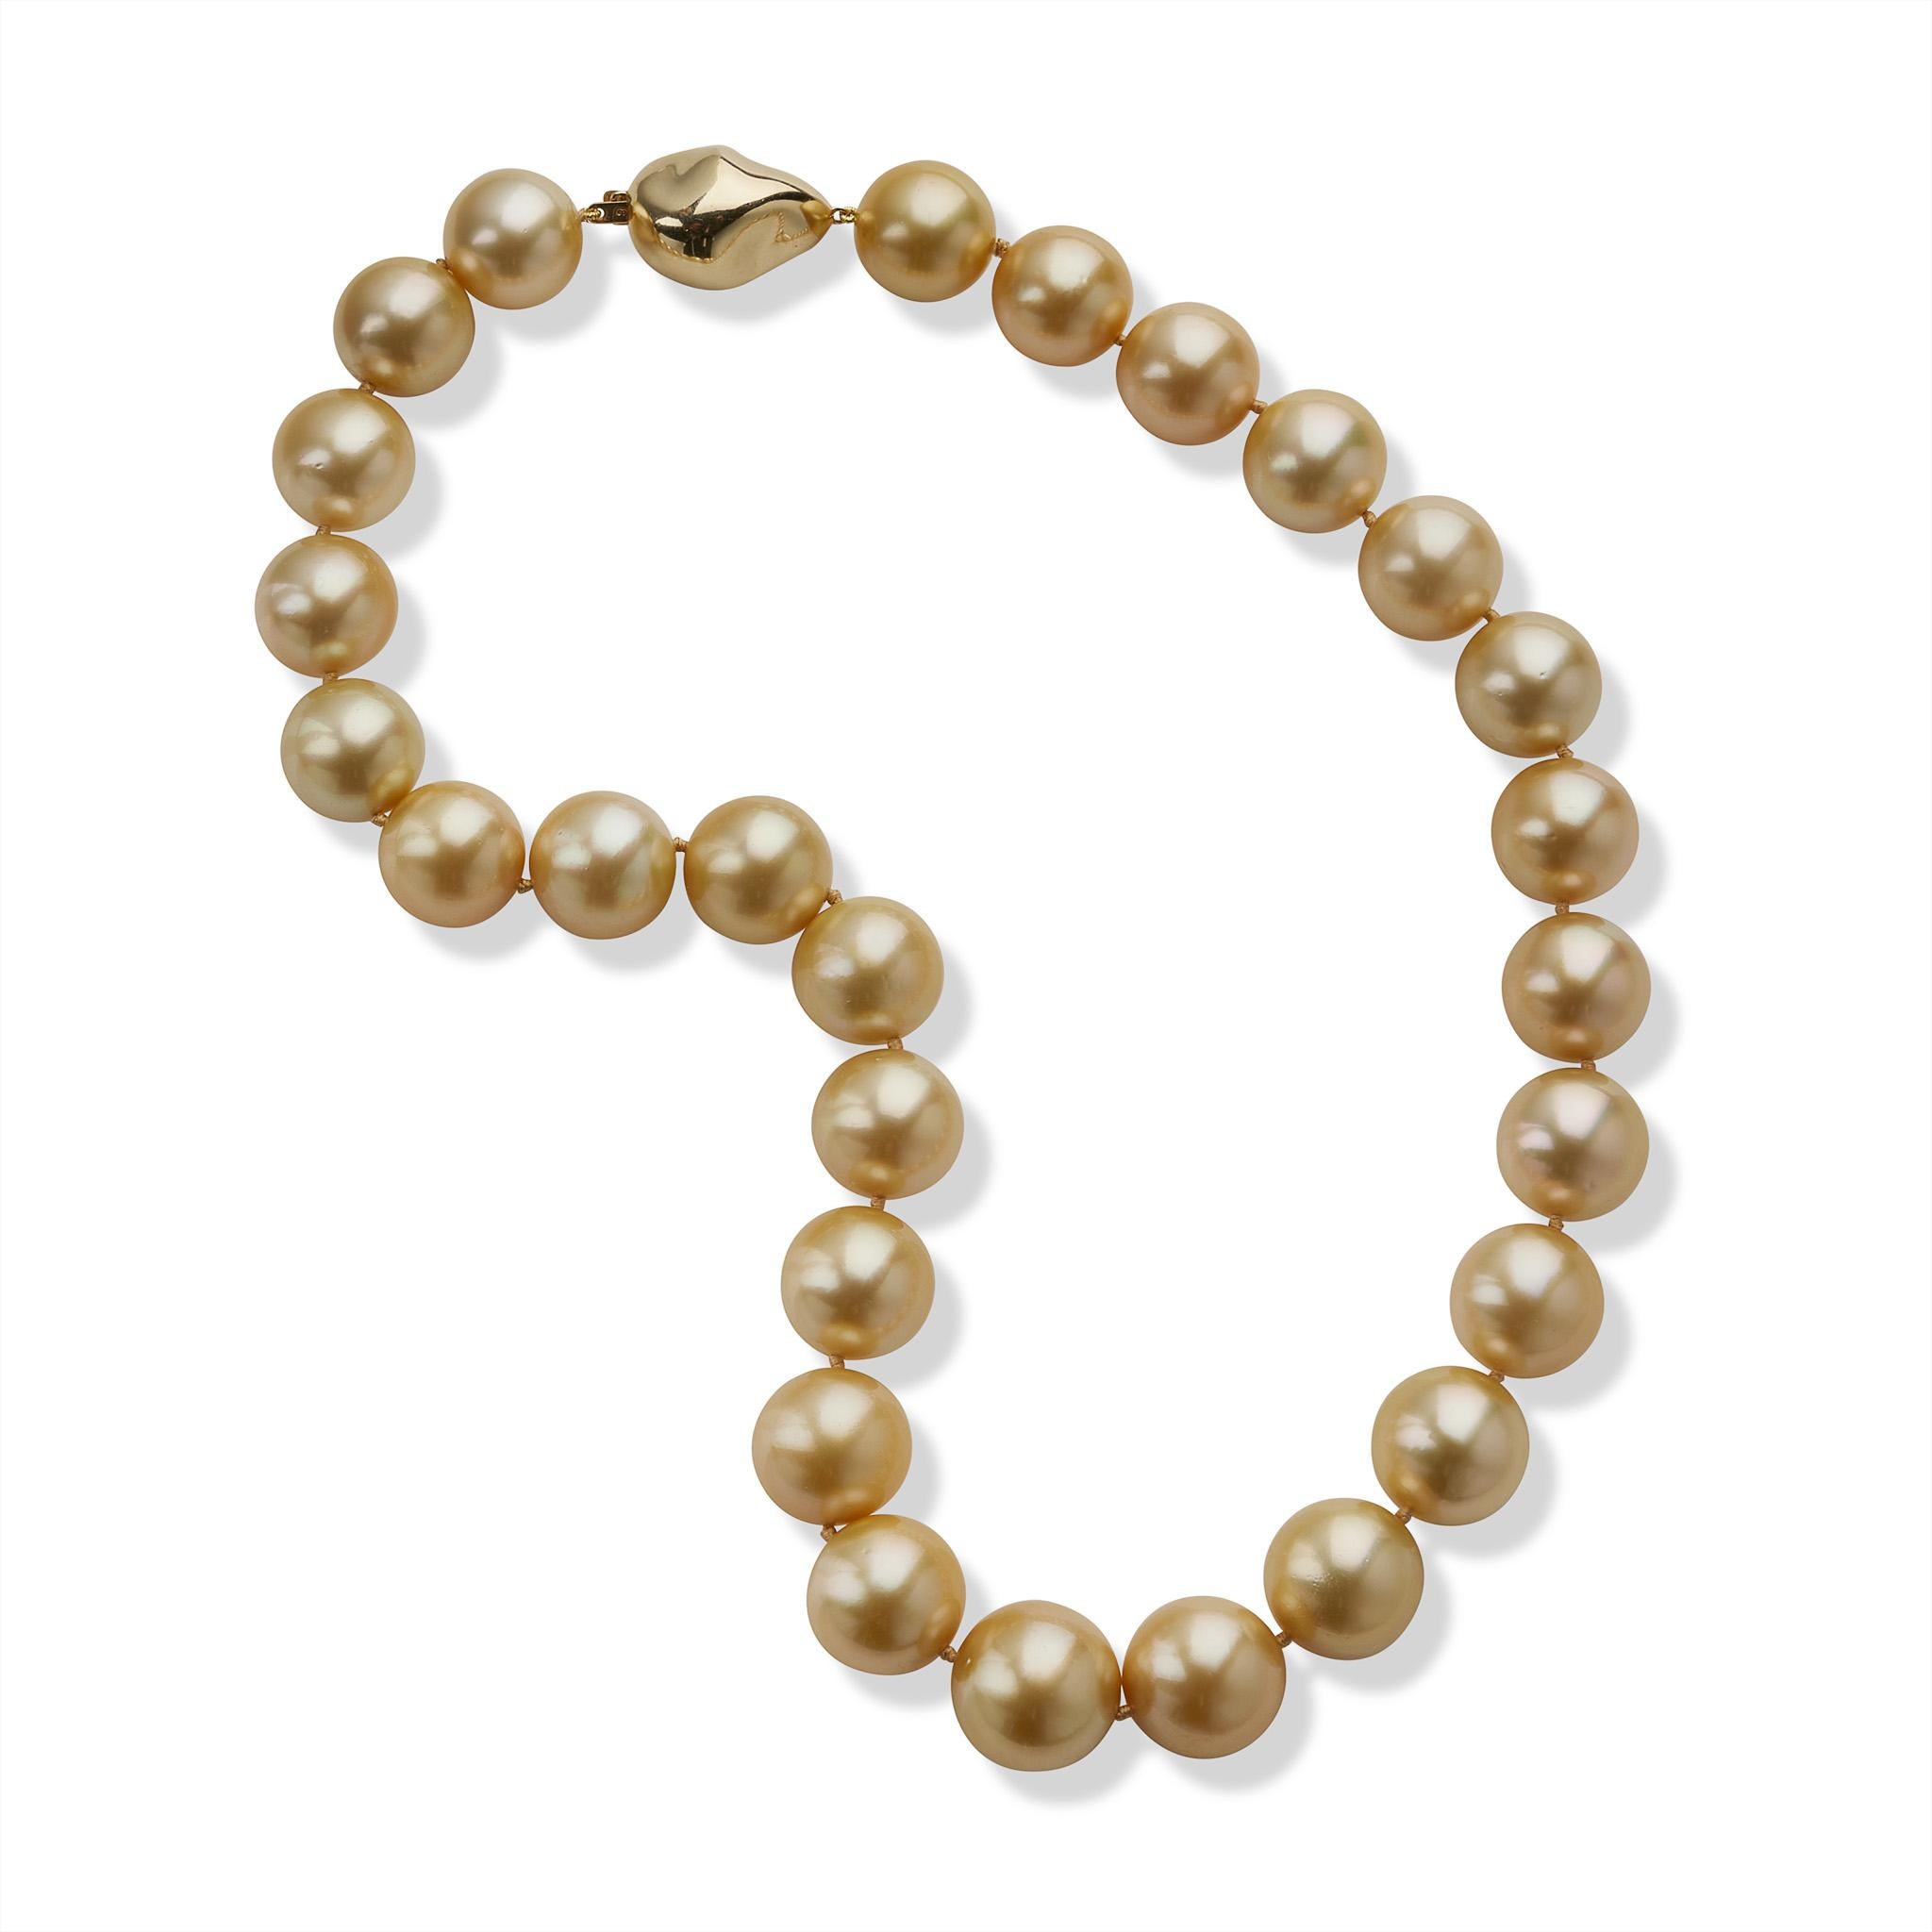 This contemporary necklace is composed of 27 natural color golden cultured South Sea Pearls measuring approximately 17.20 to 15.00mm. Completed by a baroque pearl form 14K gold clasp, the round golden pearls have a touch of rose colored orient.